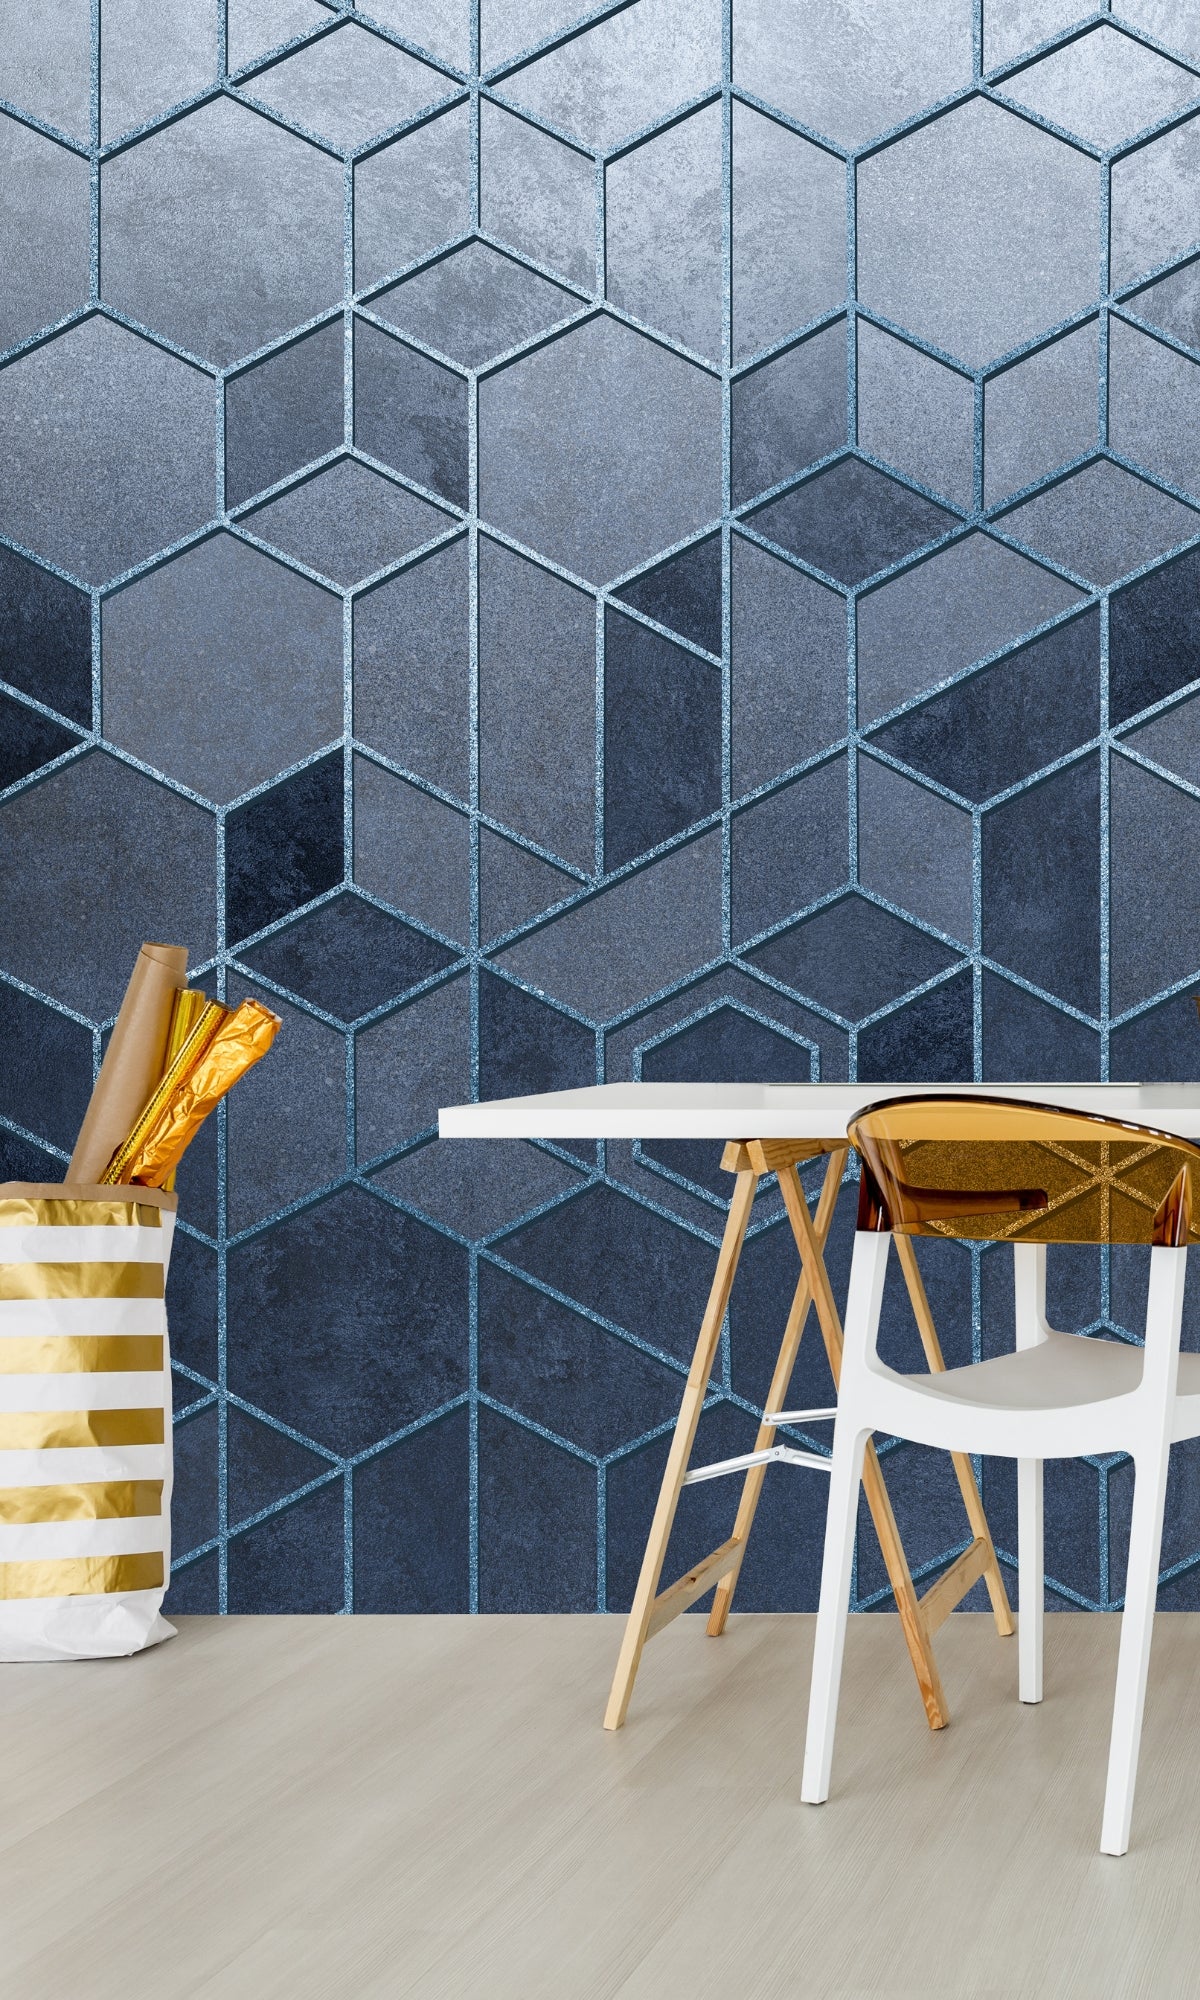 Blue Geometric Abstraction of Hexagons Mural Wallpaper M1307-Sample